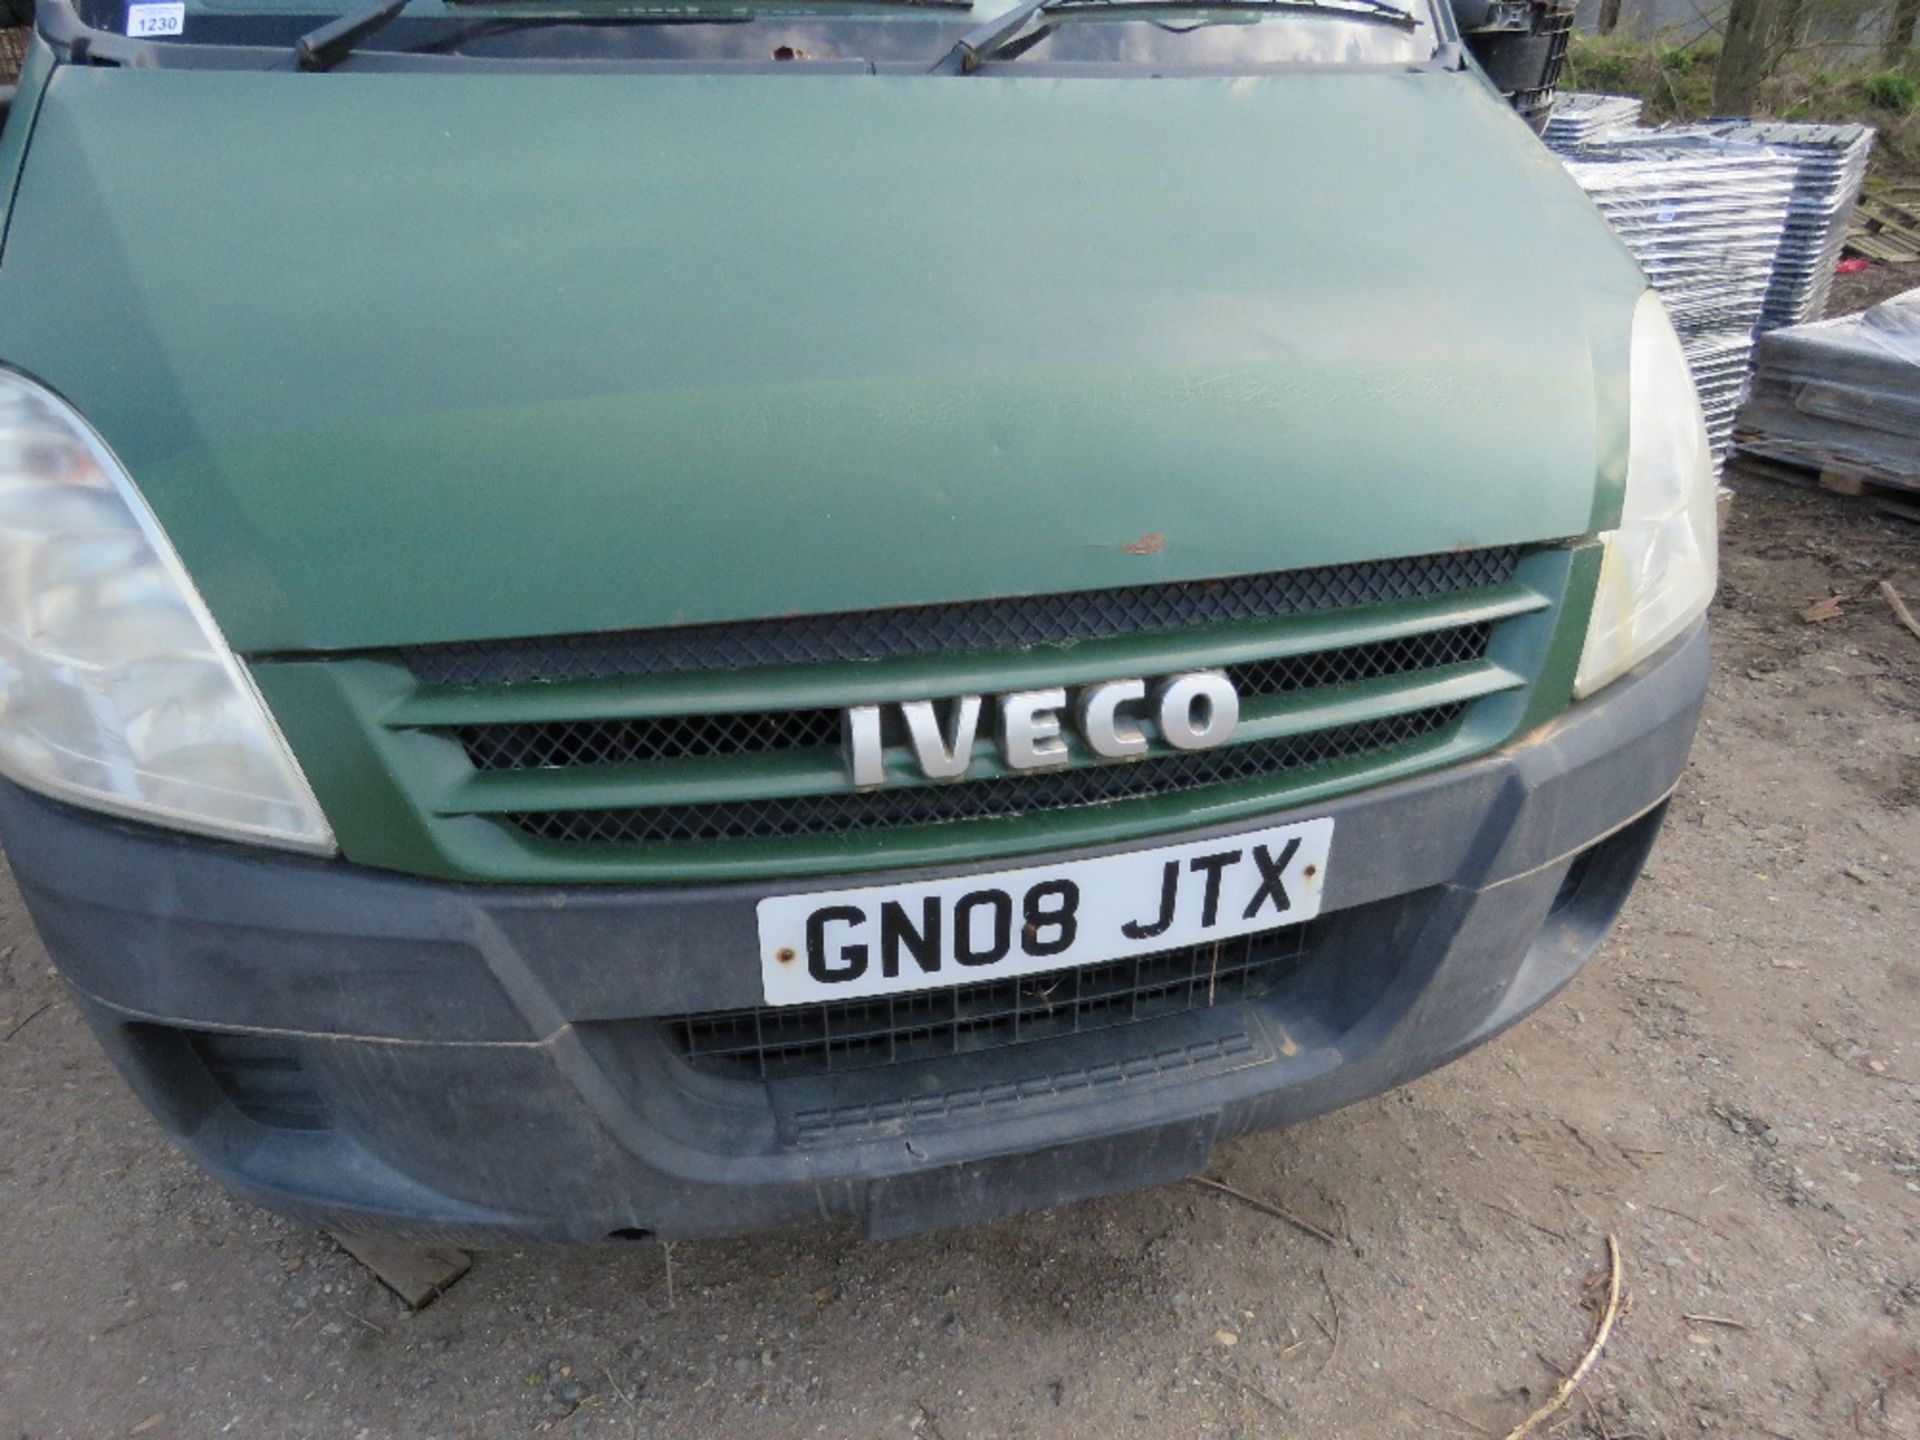 IVECO 35.125 PANEL VAN WITH HIGH ROOF REG:GN08 JTX. MOT EXPIRED, V5 TO APPLY FOR. WHEN TESTED WAS SE - Image 2 of 9